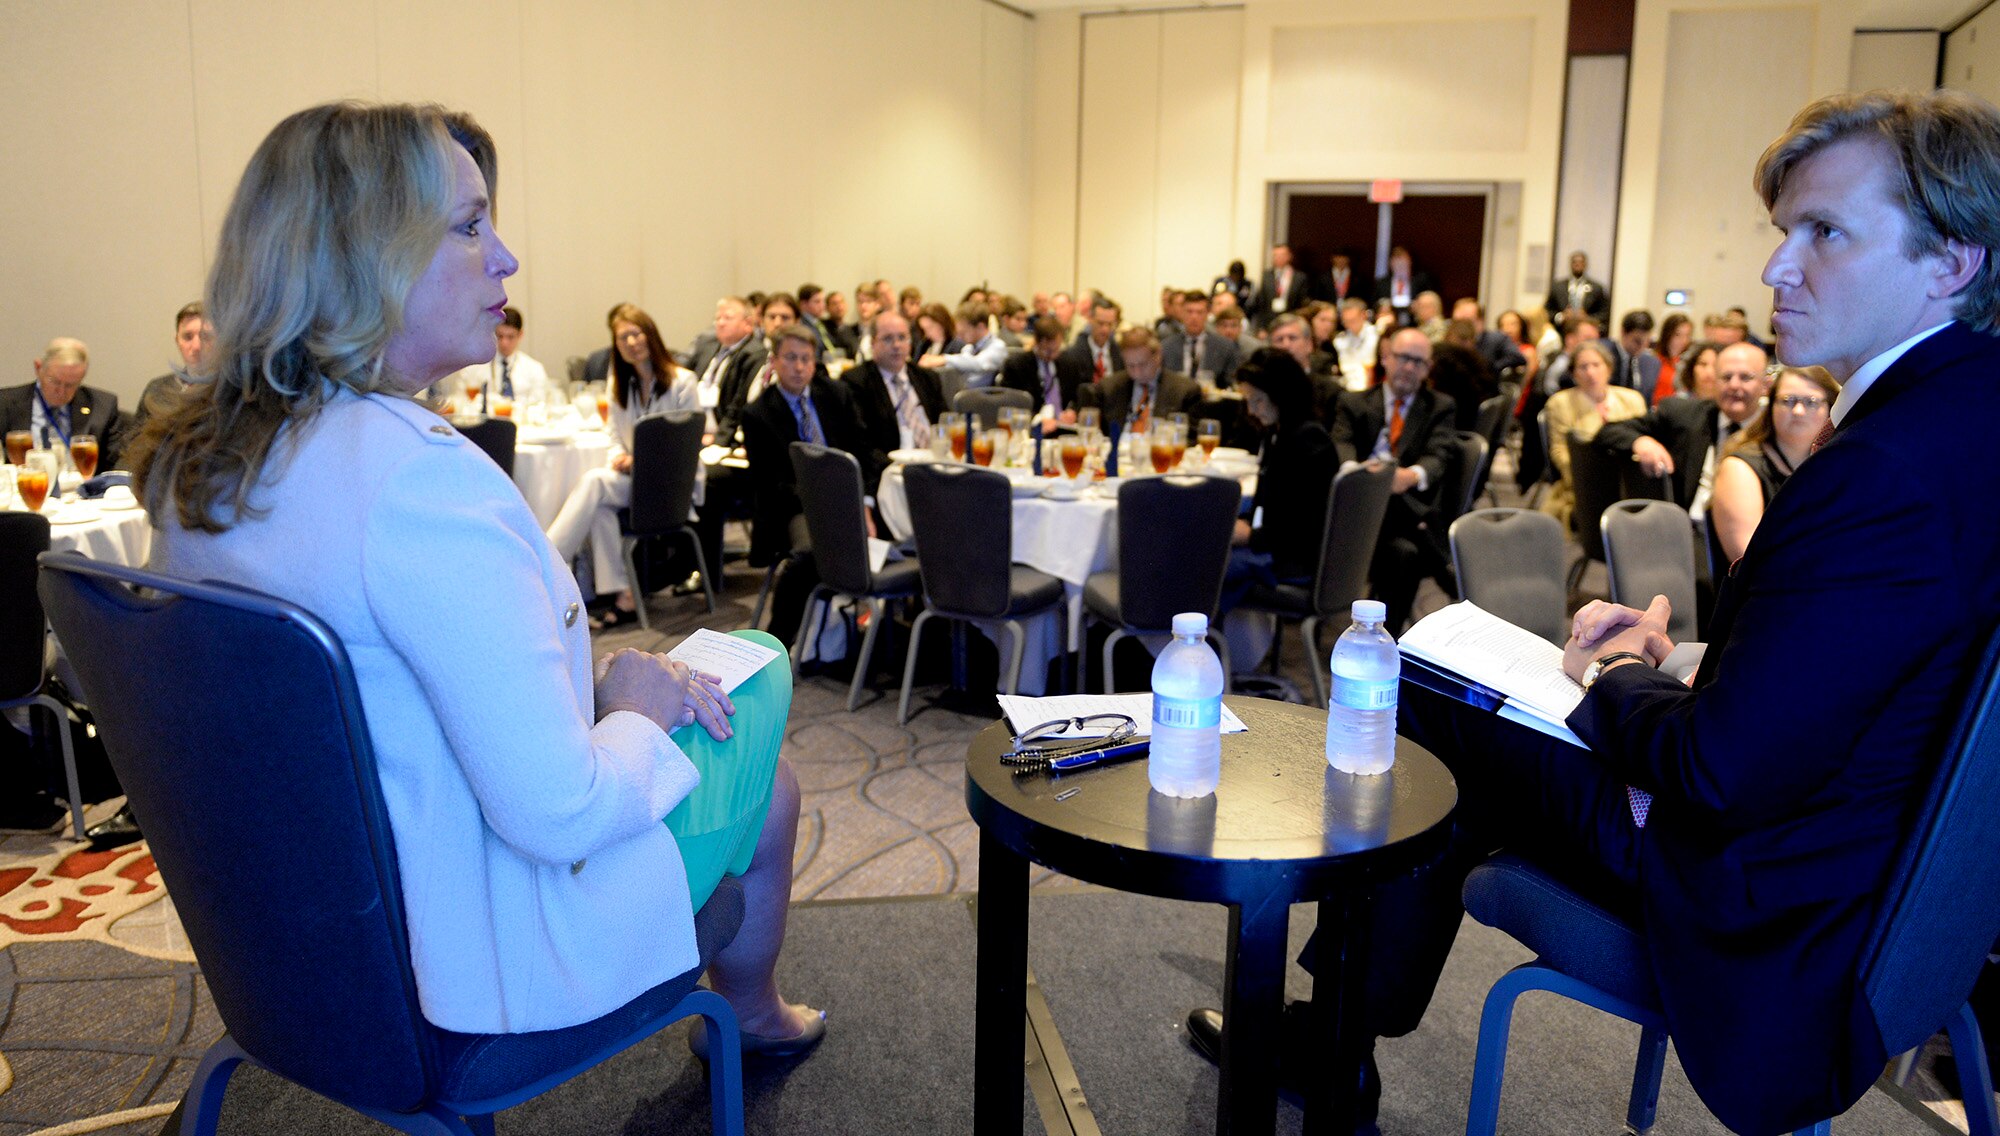 Air Force Secretary Deborah Lee James participates in a discussion, moderated by Eldridge Colby, about the space enterprise at the Center for a New American Security’s annual conference in Washington, D.C., on June 20, 2016. (U.S. Air Force photo/Scott M. Ash)